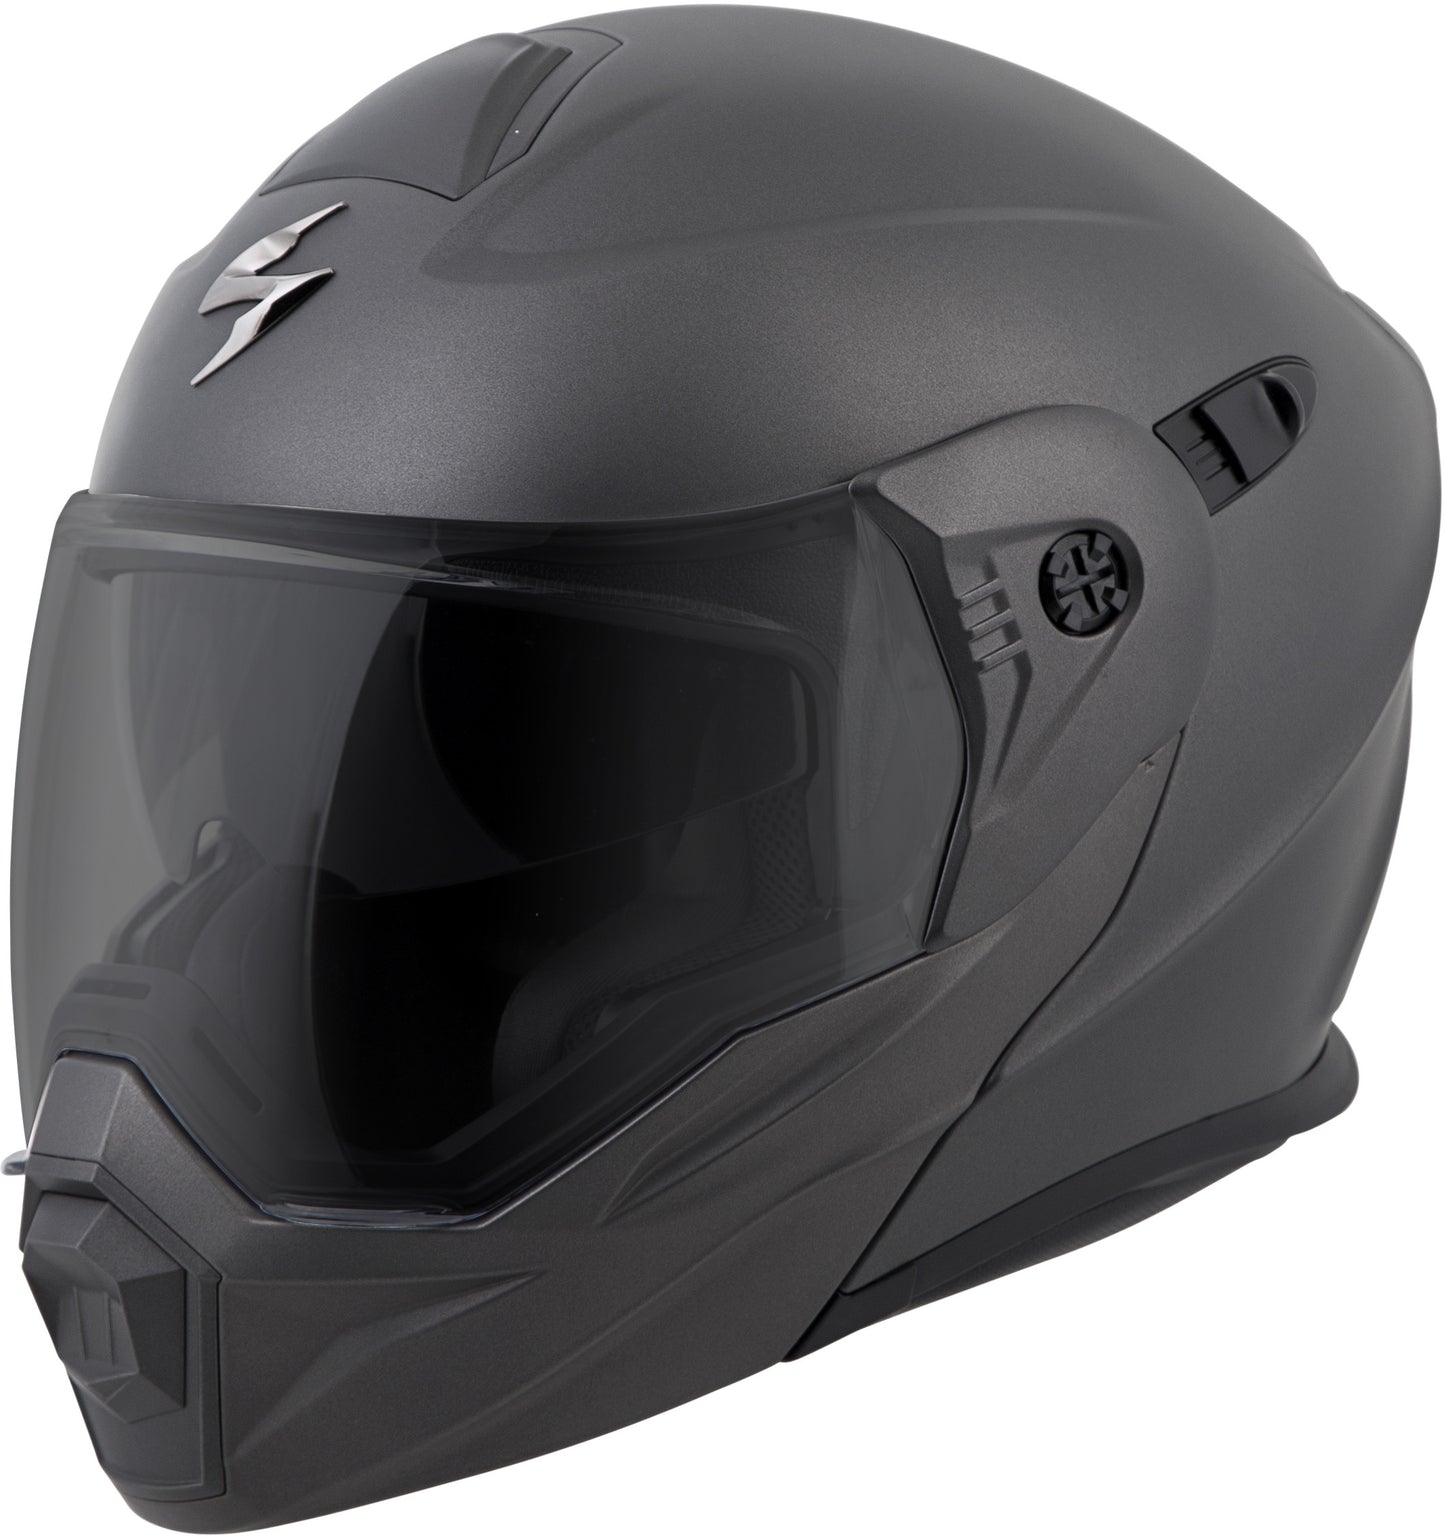 Scorpion EXO-AT950 Solid Modular Helmet (CLOSEOUT) - Matte Anthracite